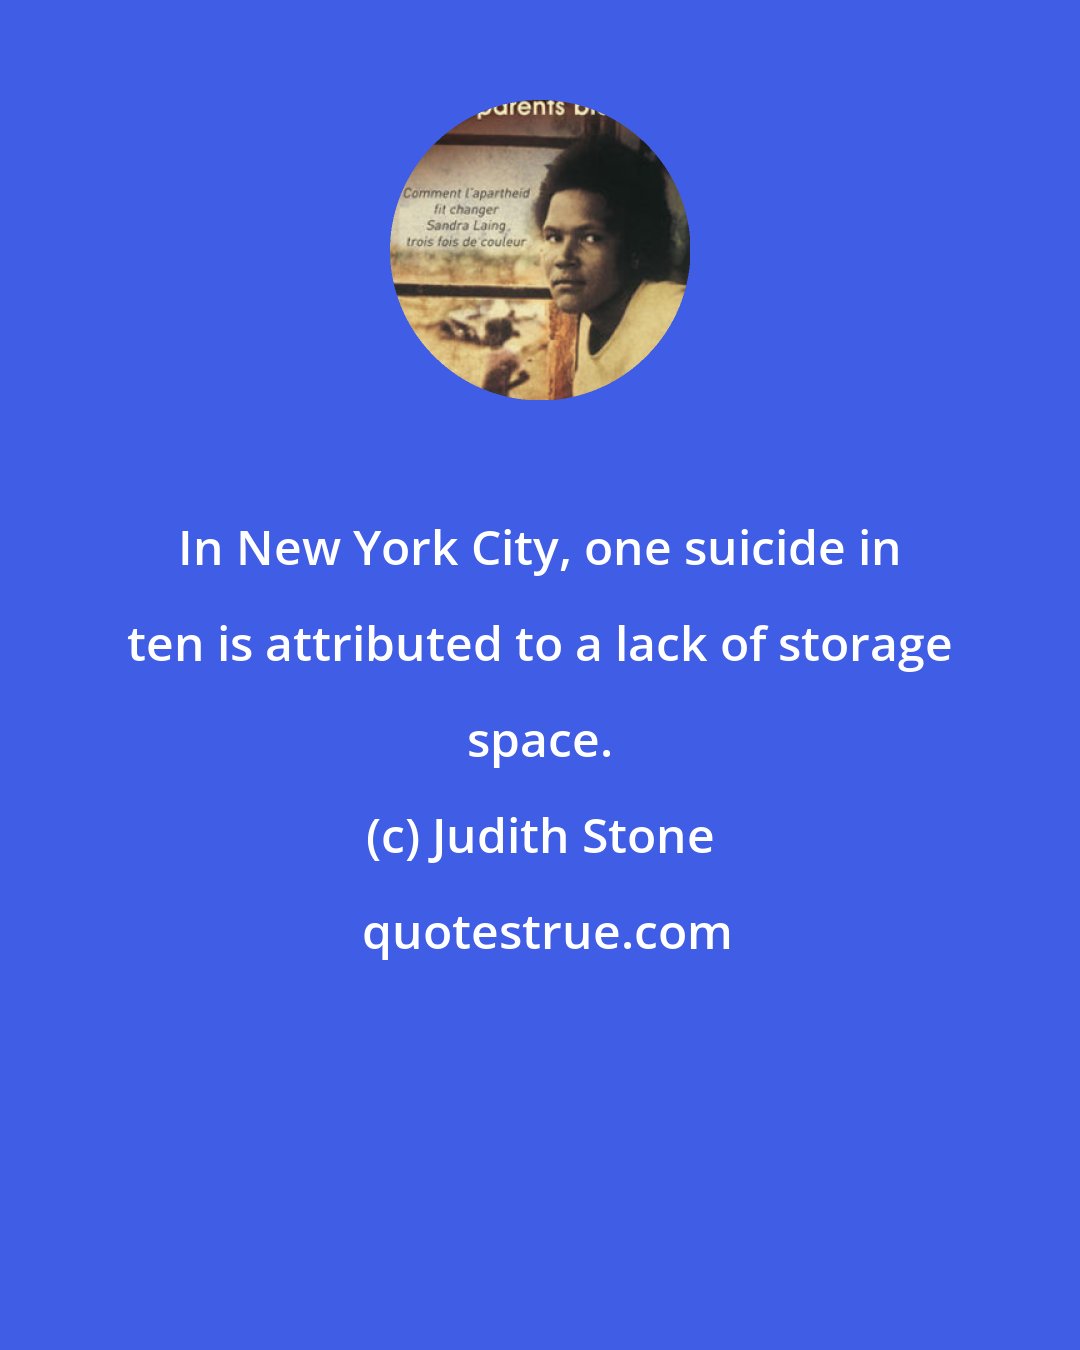 Judith Stone: In New York City, one suicide in ten is attributed to a lack of storage space.